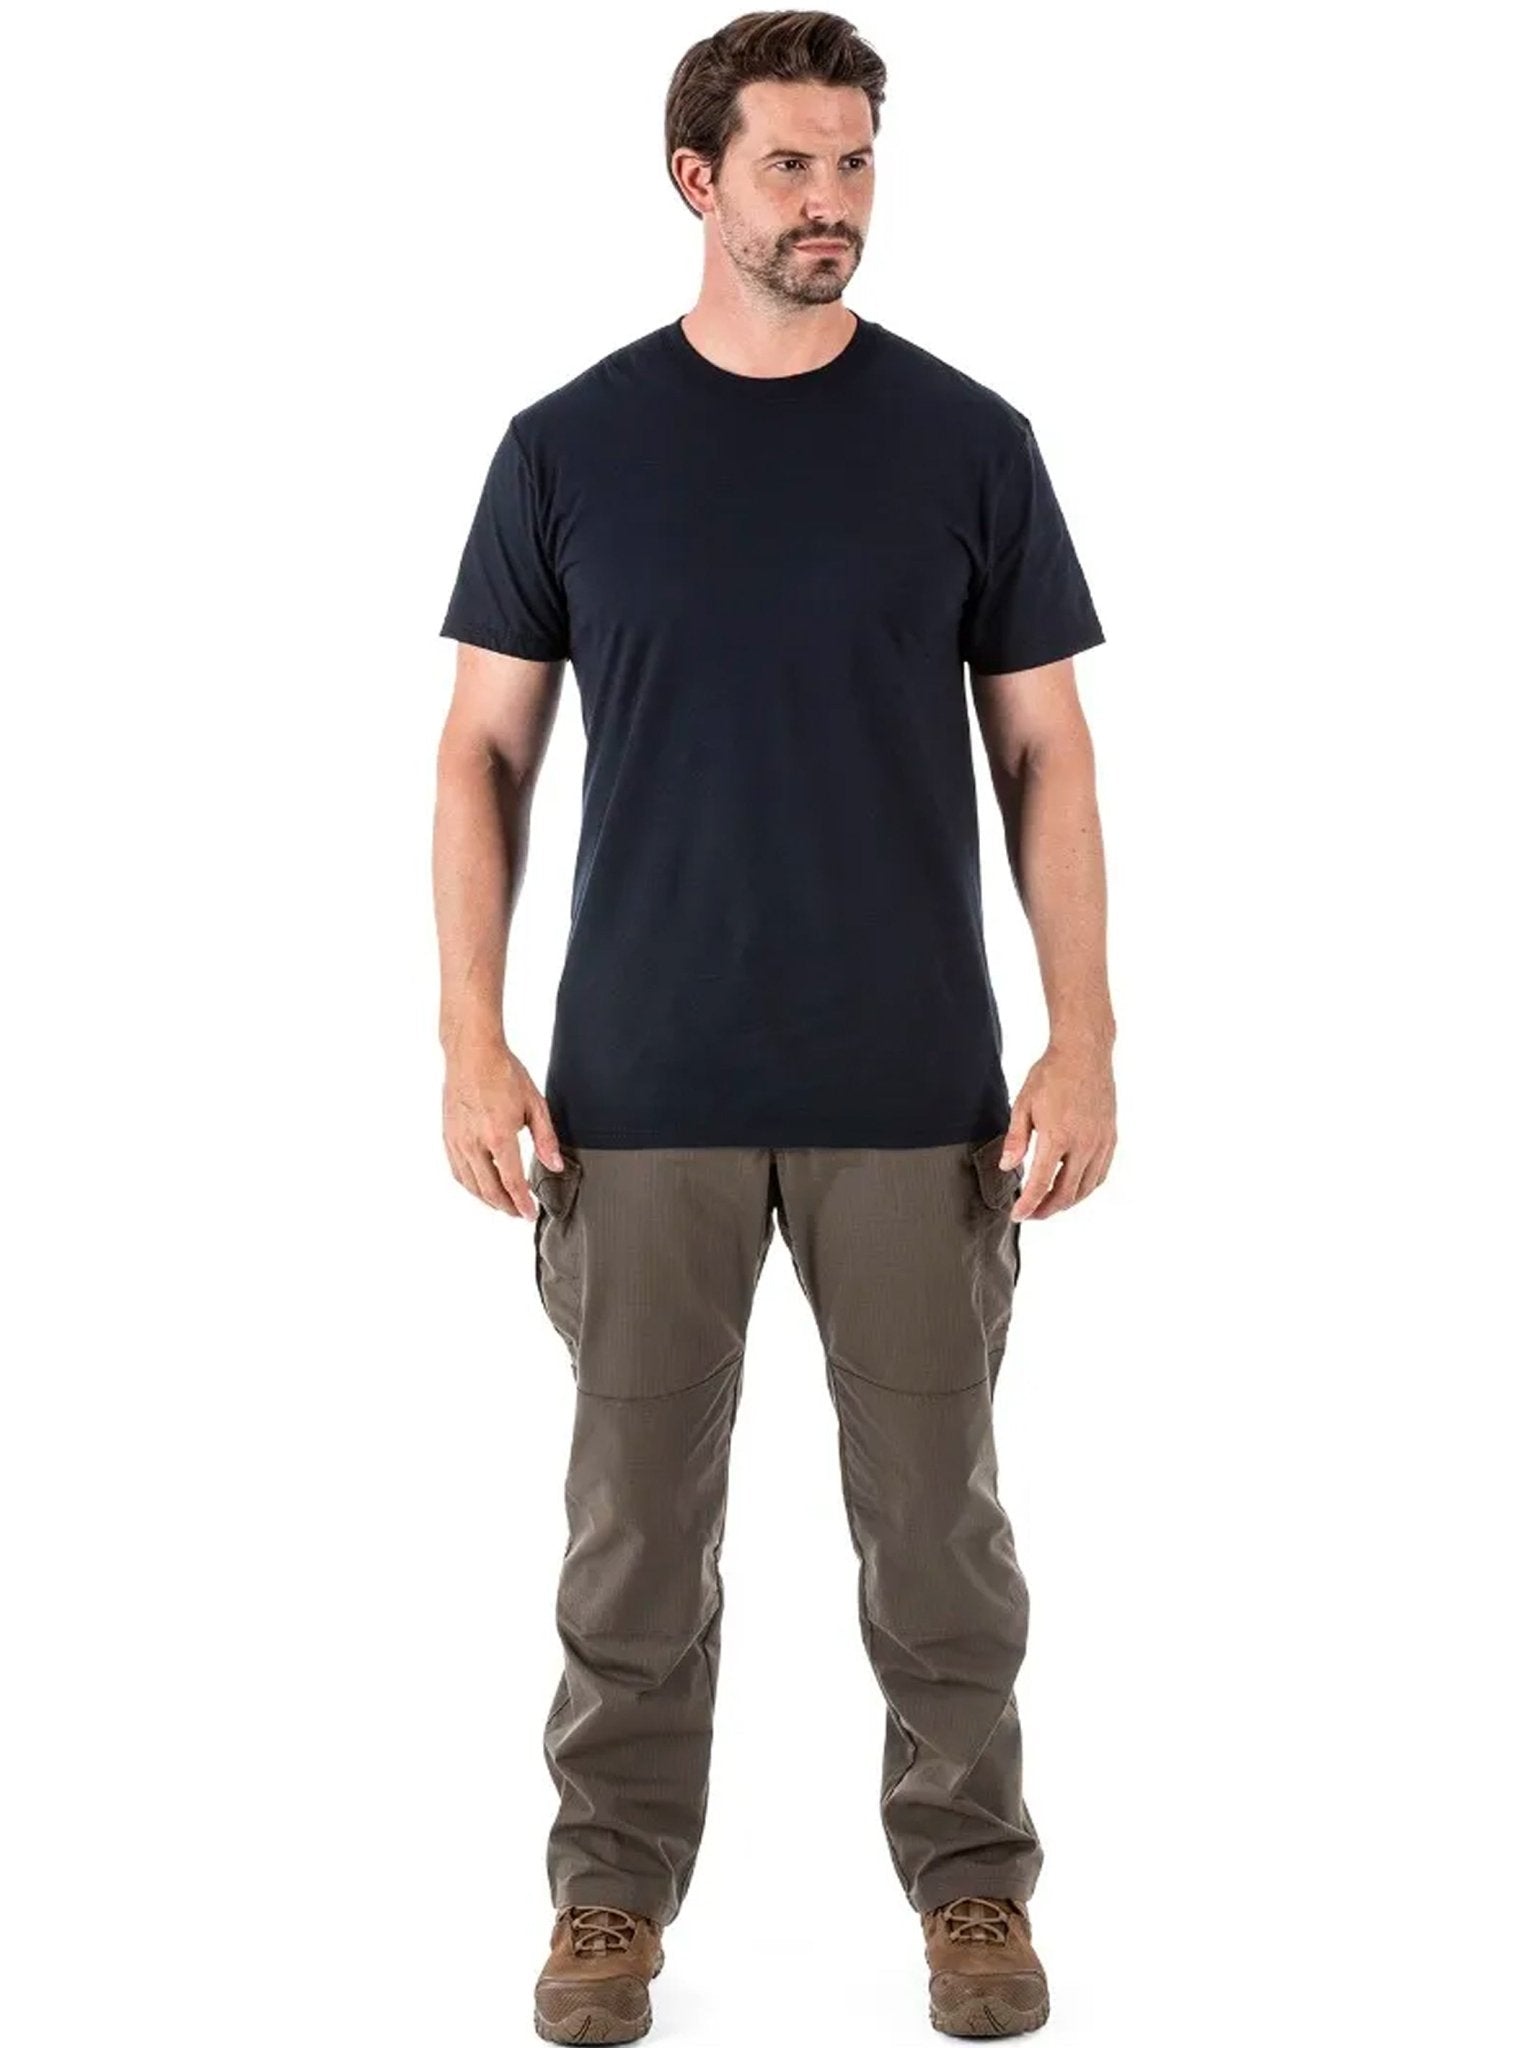 4elementsclothing5.11 Tactical5.11 Tactical - 5.11 Professional Utili-T Crew 3 Pack - pack of 3 Tee / t-Shirts - style 40016T-Shirt40016-019-S